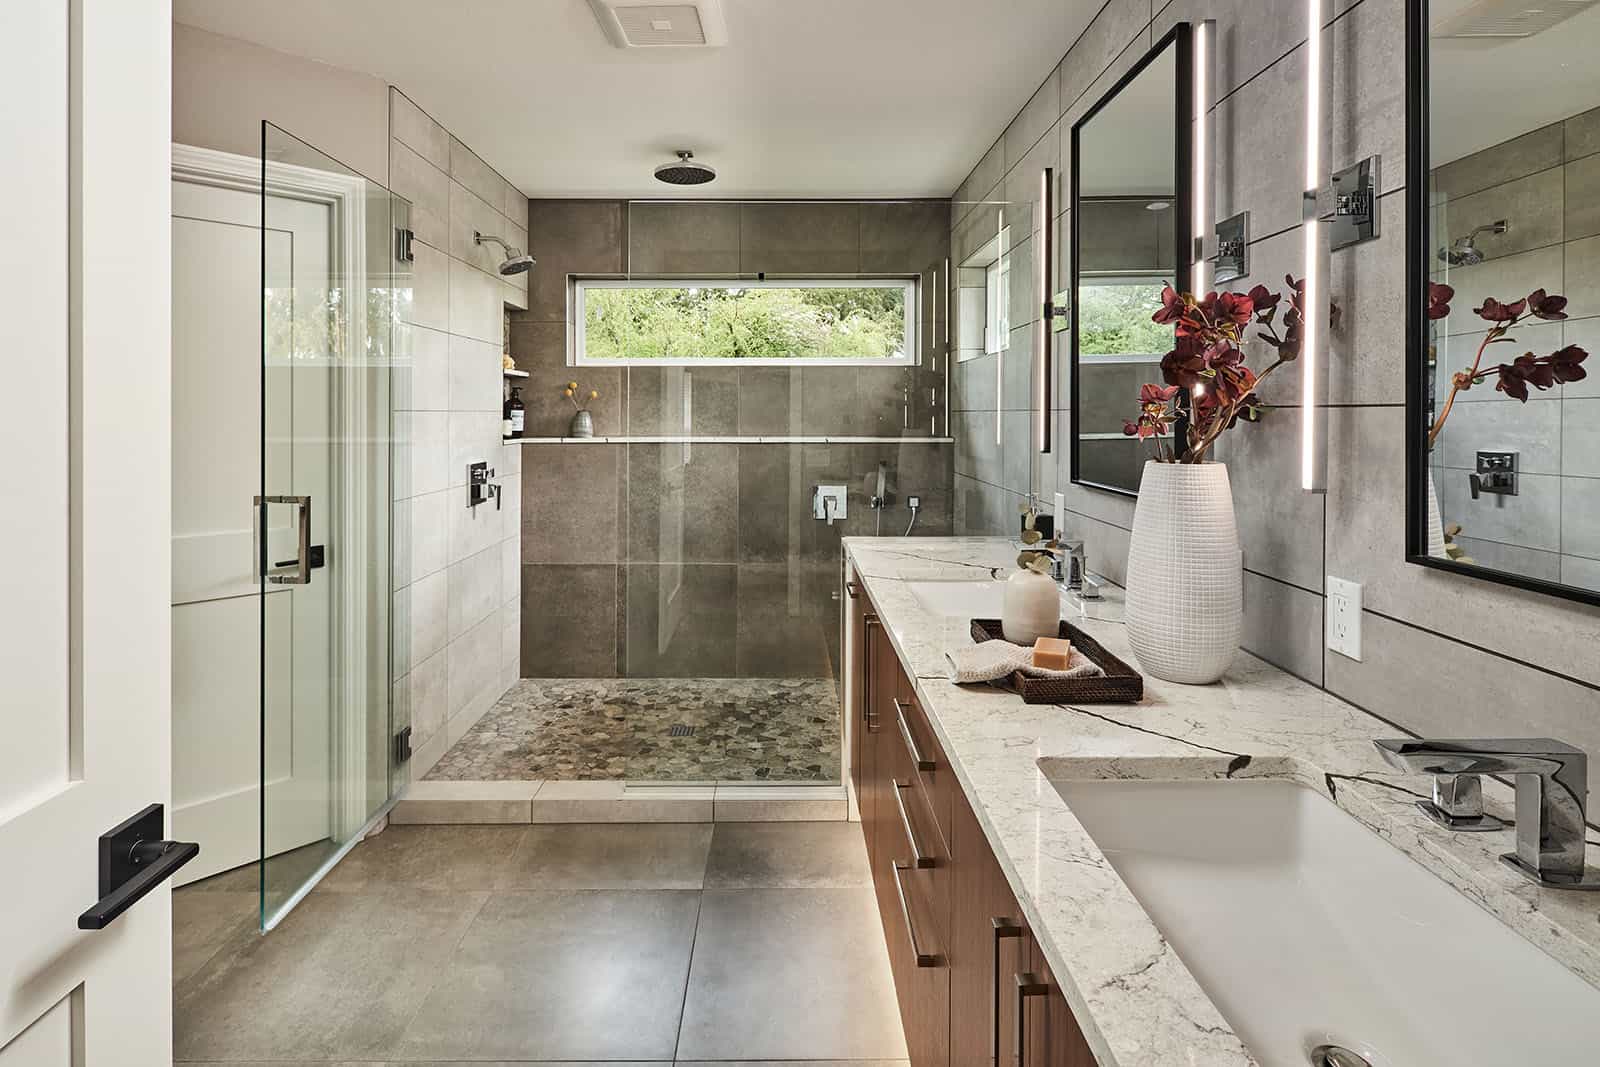 A bathroom remodeling project in beaverton, oregon with earth tones and a spa-like feel